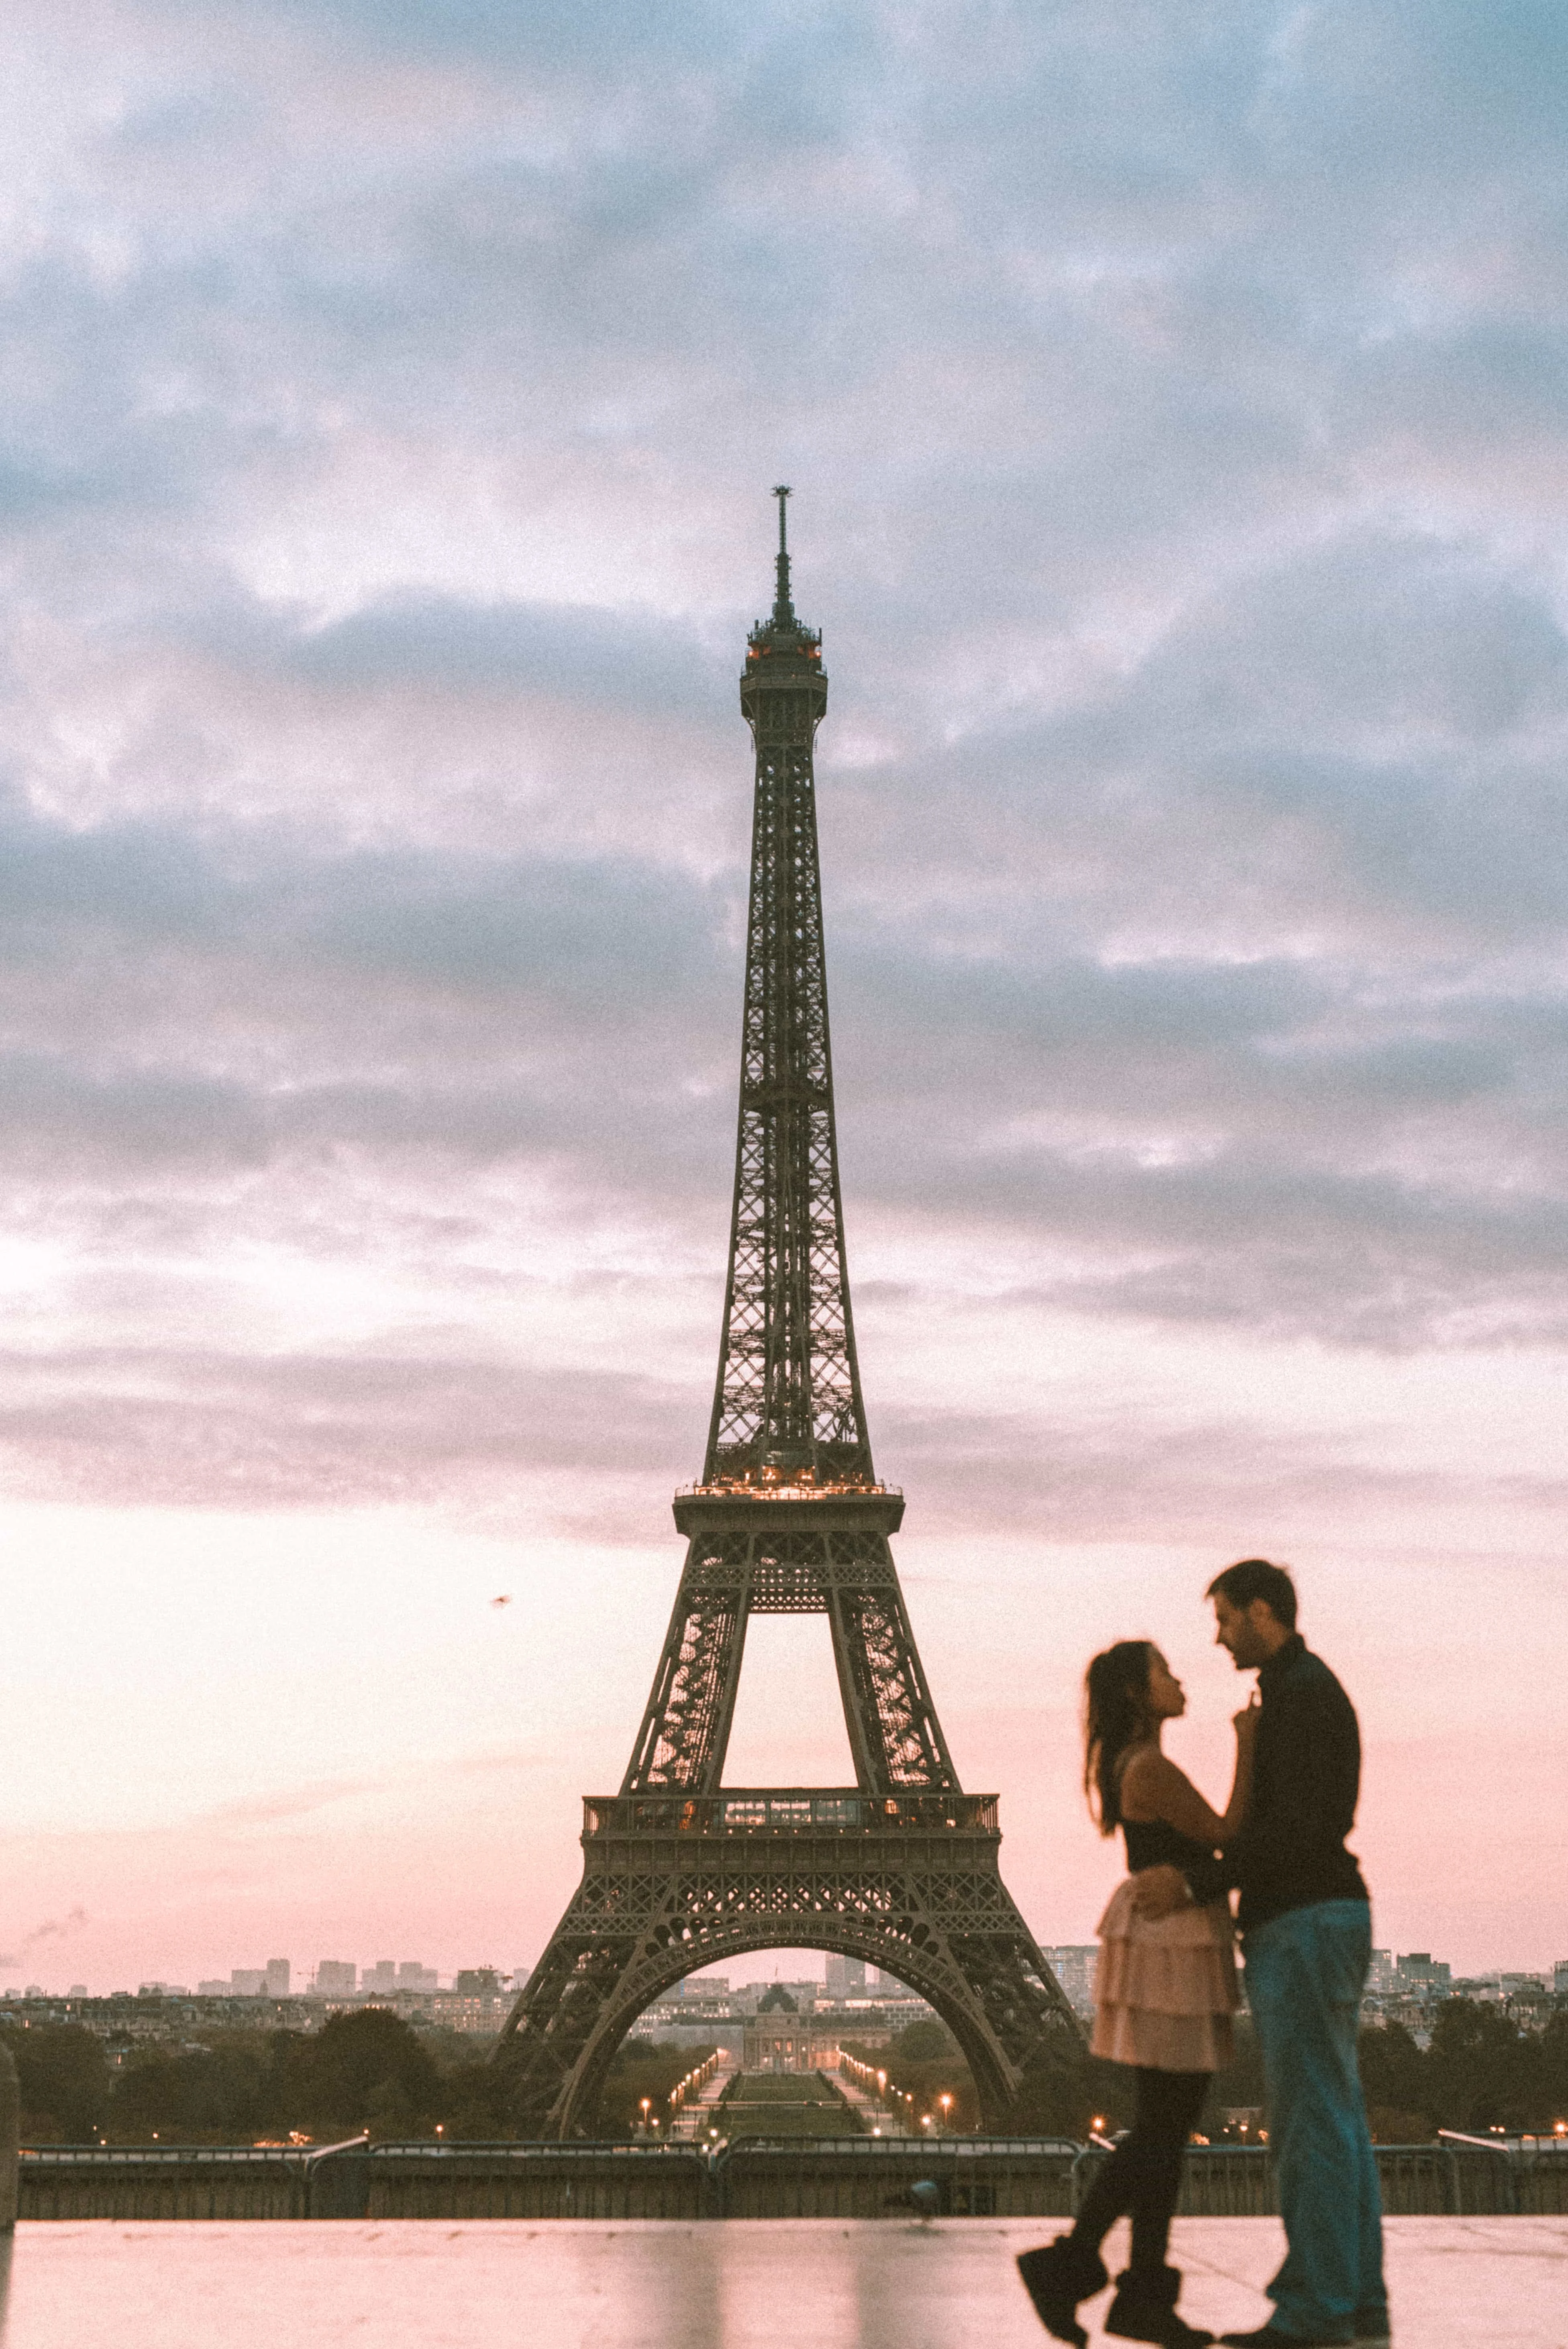 10 Most Instagrammable Places in France, How To Get From Paris Beauvais Airport To Eiffel Tower Best Way, Beauvais airport to Eiffel Tower, paris Beauvais to Eiffel Tower, Paris beauvais airport to the Eiffel Tower, airport beauvais to Eiffel Tower, train from beauvais airport to Eiffel Tower, bus from beauvais airport to Eiffel Tower, taxi from Paris Beauvais airport to Eiffel Tower, private trasnfer from Paris Beauvais airport to Eiffel Tower,